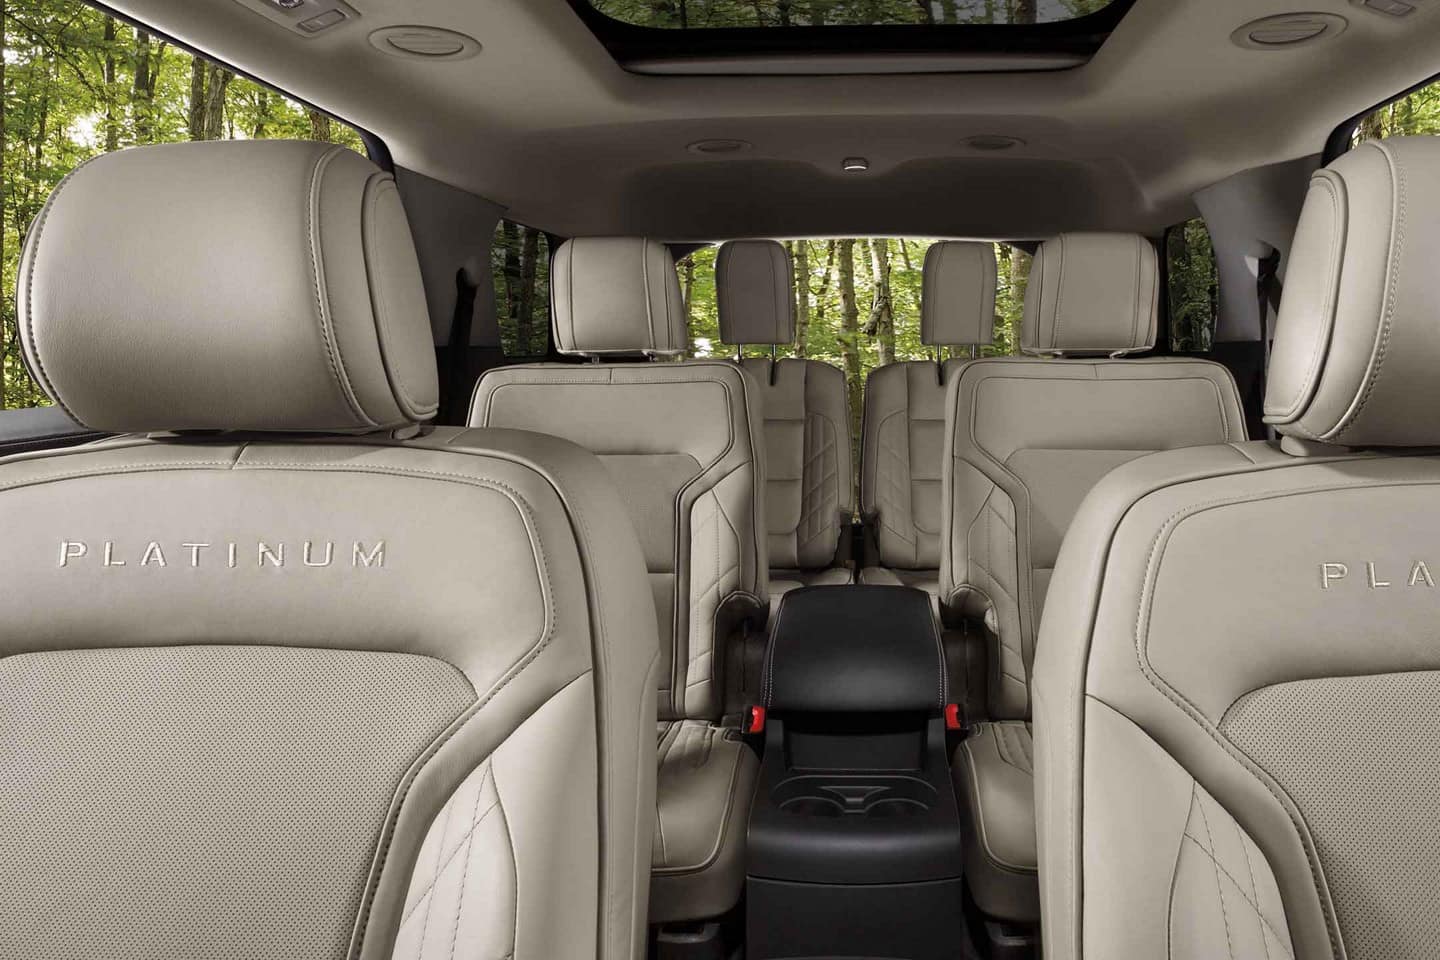 Image of the beige interior of a 2019 Ford Explorer.